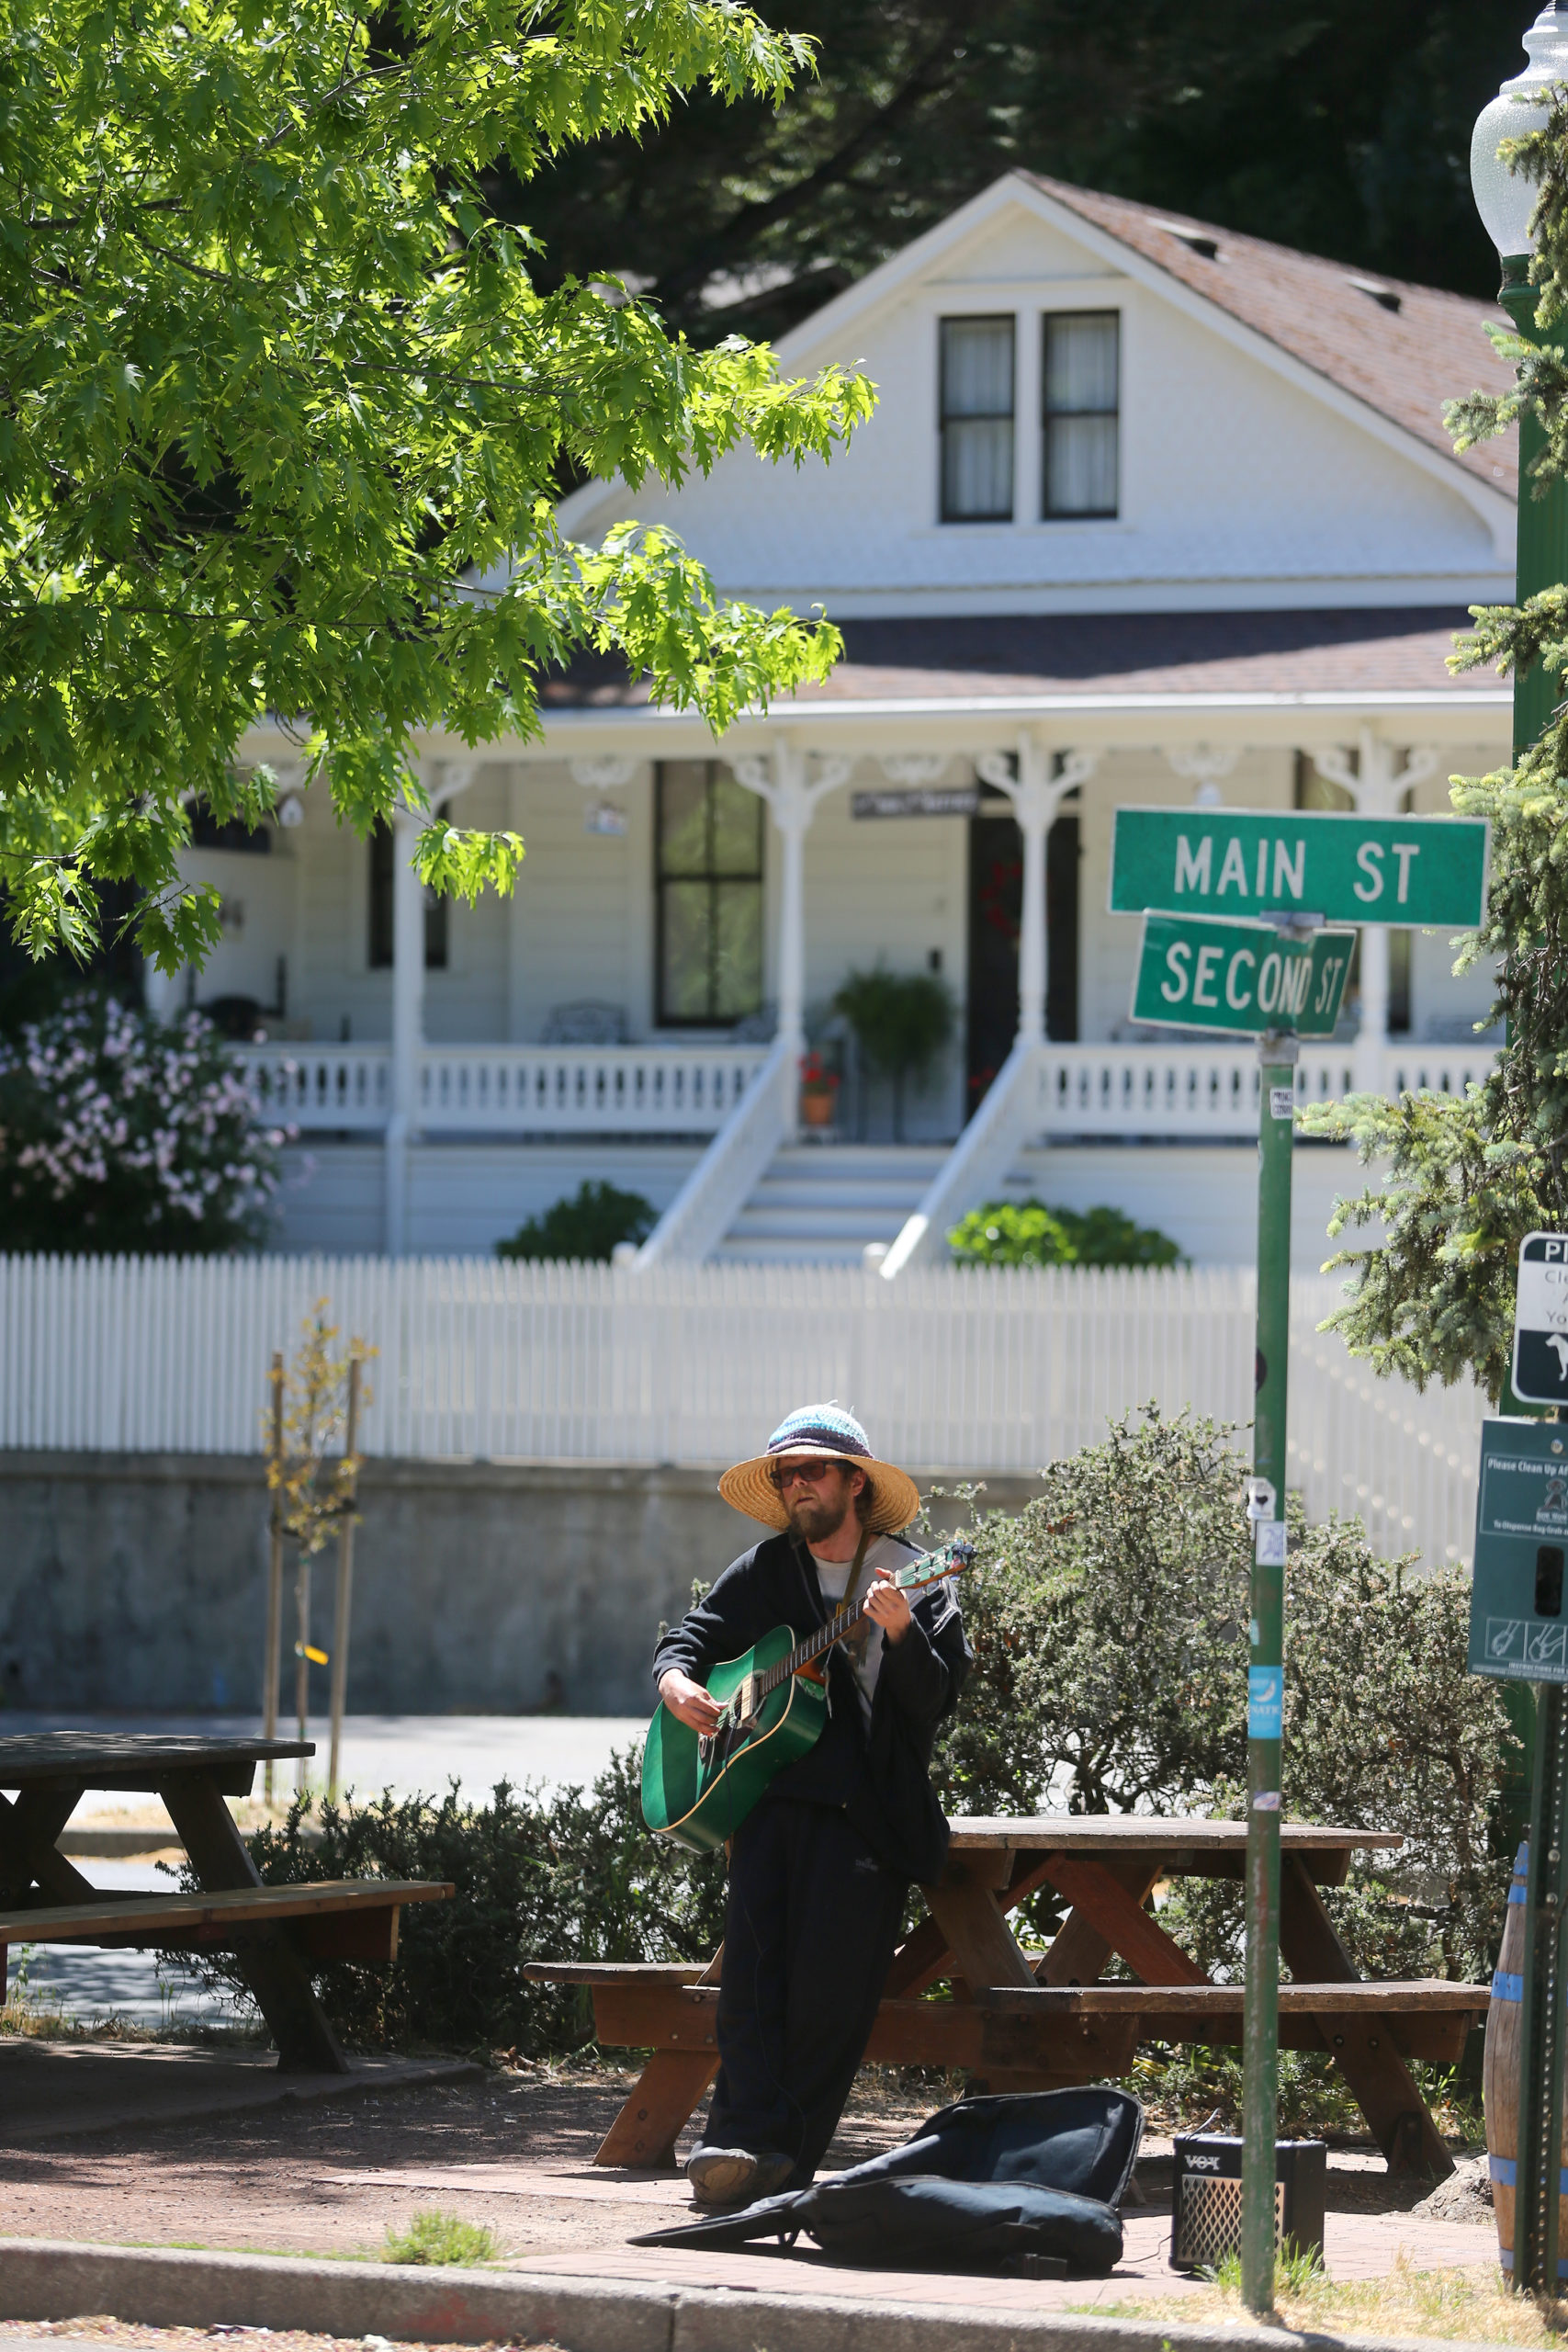 Aaron Jansen plays the guitar and sings outside the Howard Station Cafe in Occidental, Calif., on Thursday, May 13, 2021. (Beth Schlanker/Sonoma Magazine)